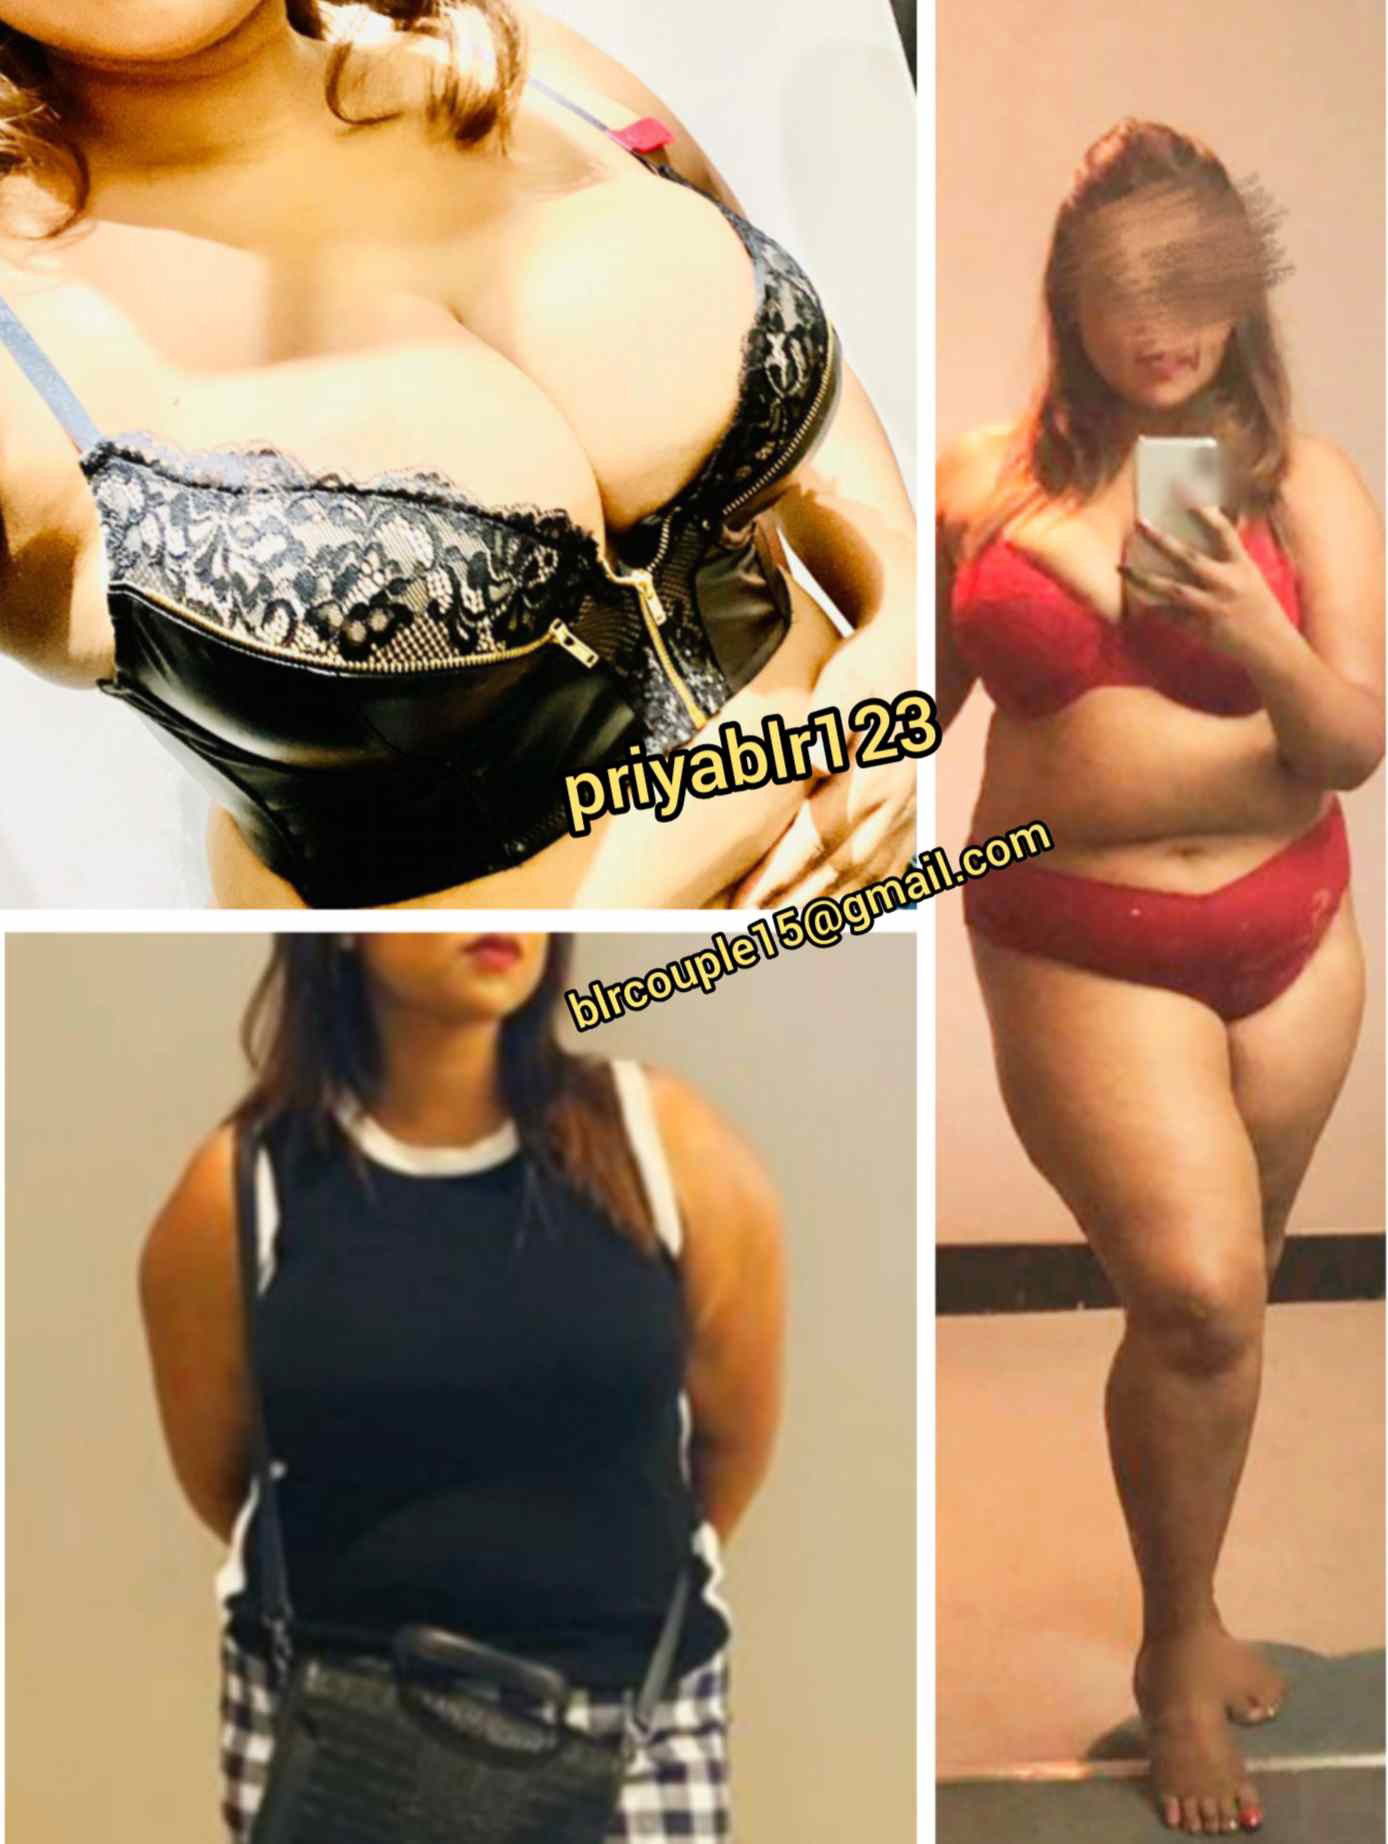 Shared Photo by priyablr123 with the username @priyablr123, who is a star user,  June 7, 2020 at 5:20 AM. The post is about the topic Lusty Bangalore and the text says 'Horny figure and sexy boobs and lips of Priya slutty! Keep sharing and keep commenting dirty to encourage us to post more!'